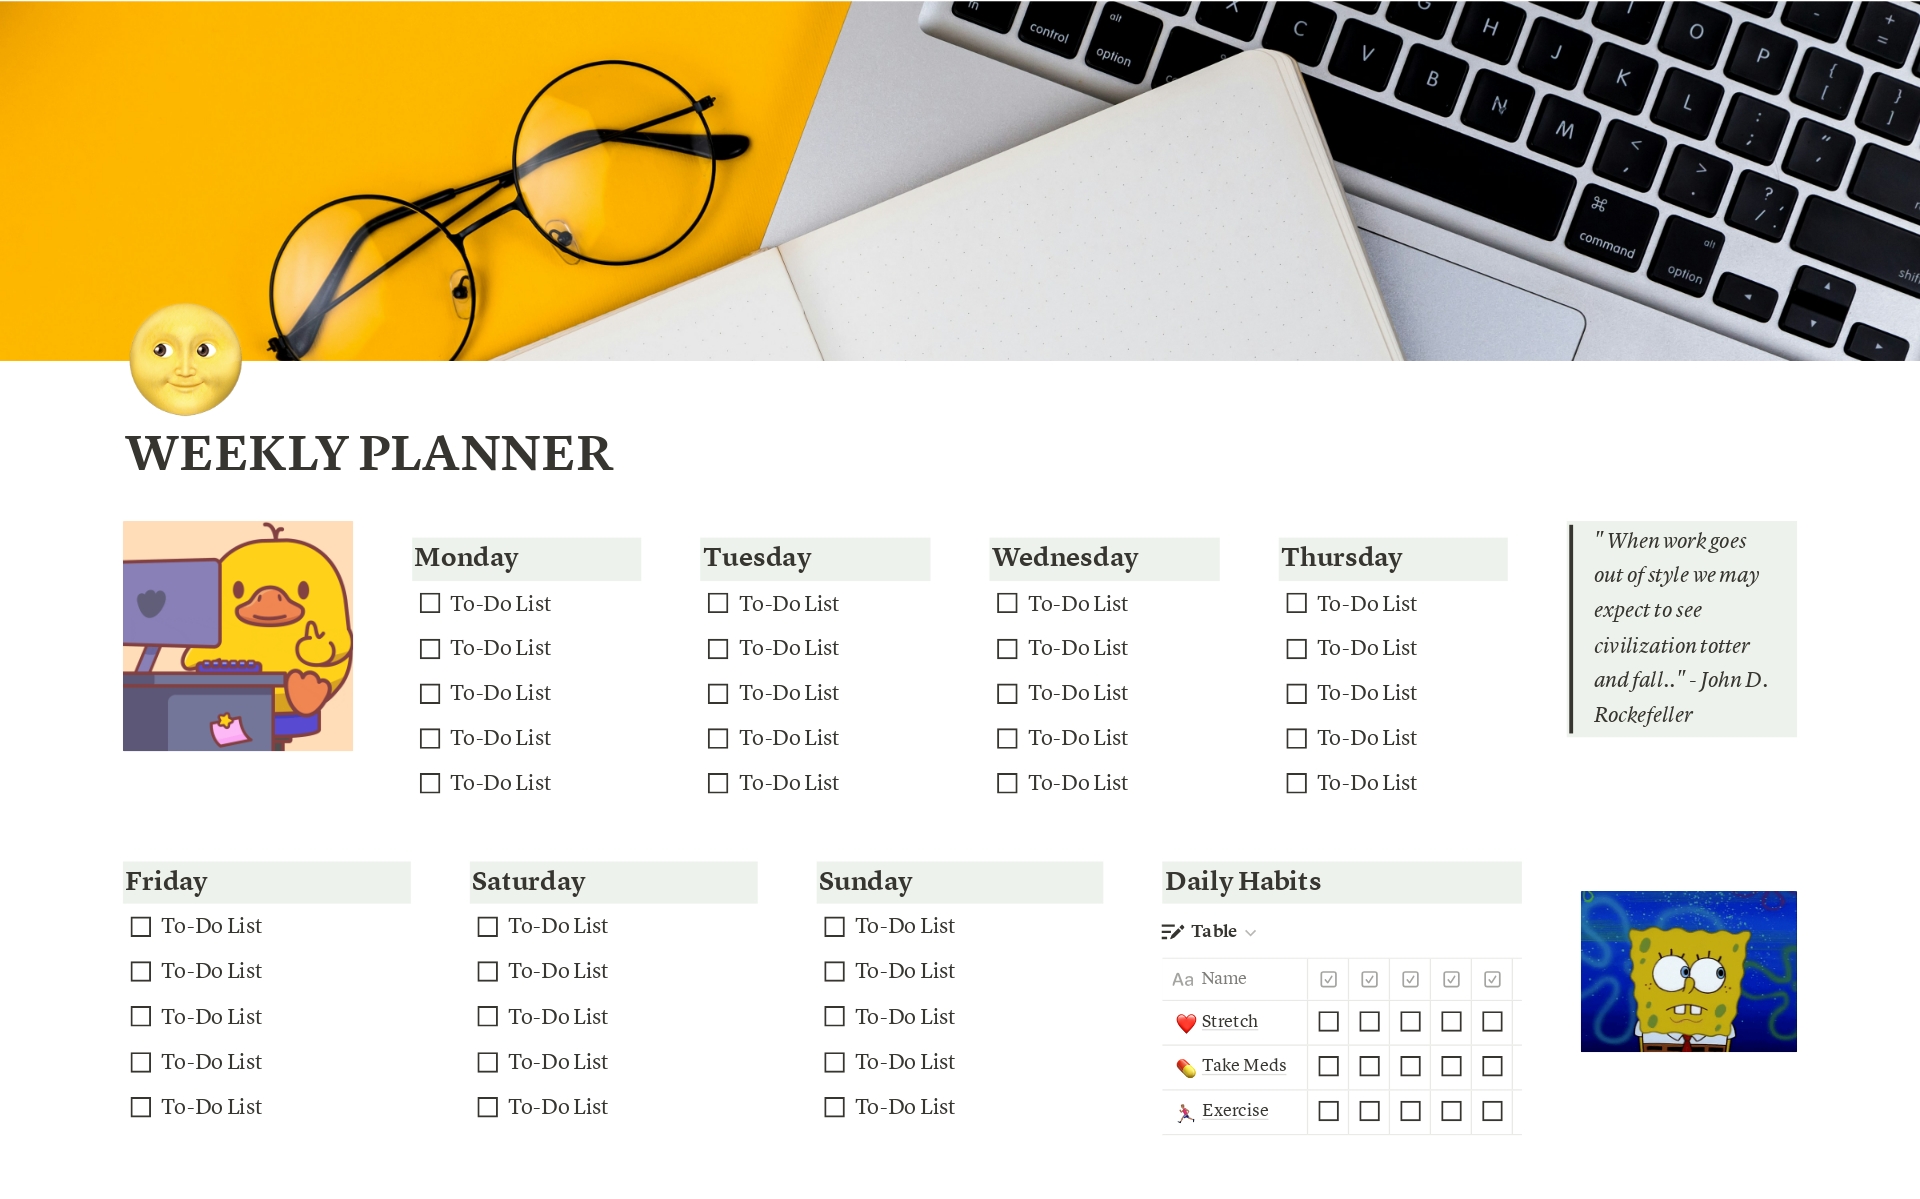 A template preview for WEEKLY PLANNER